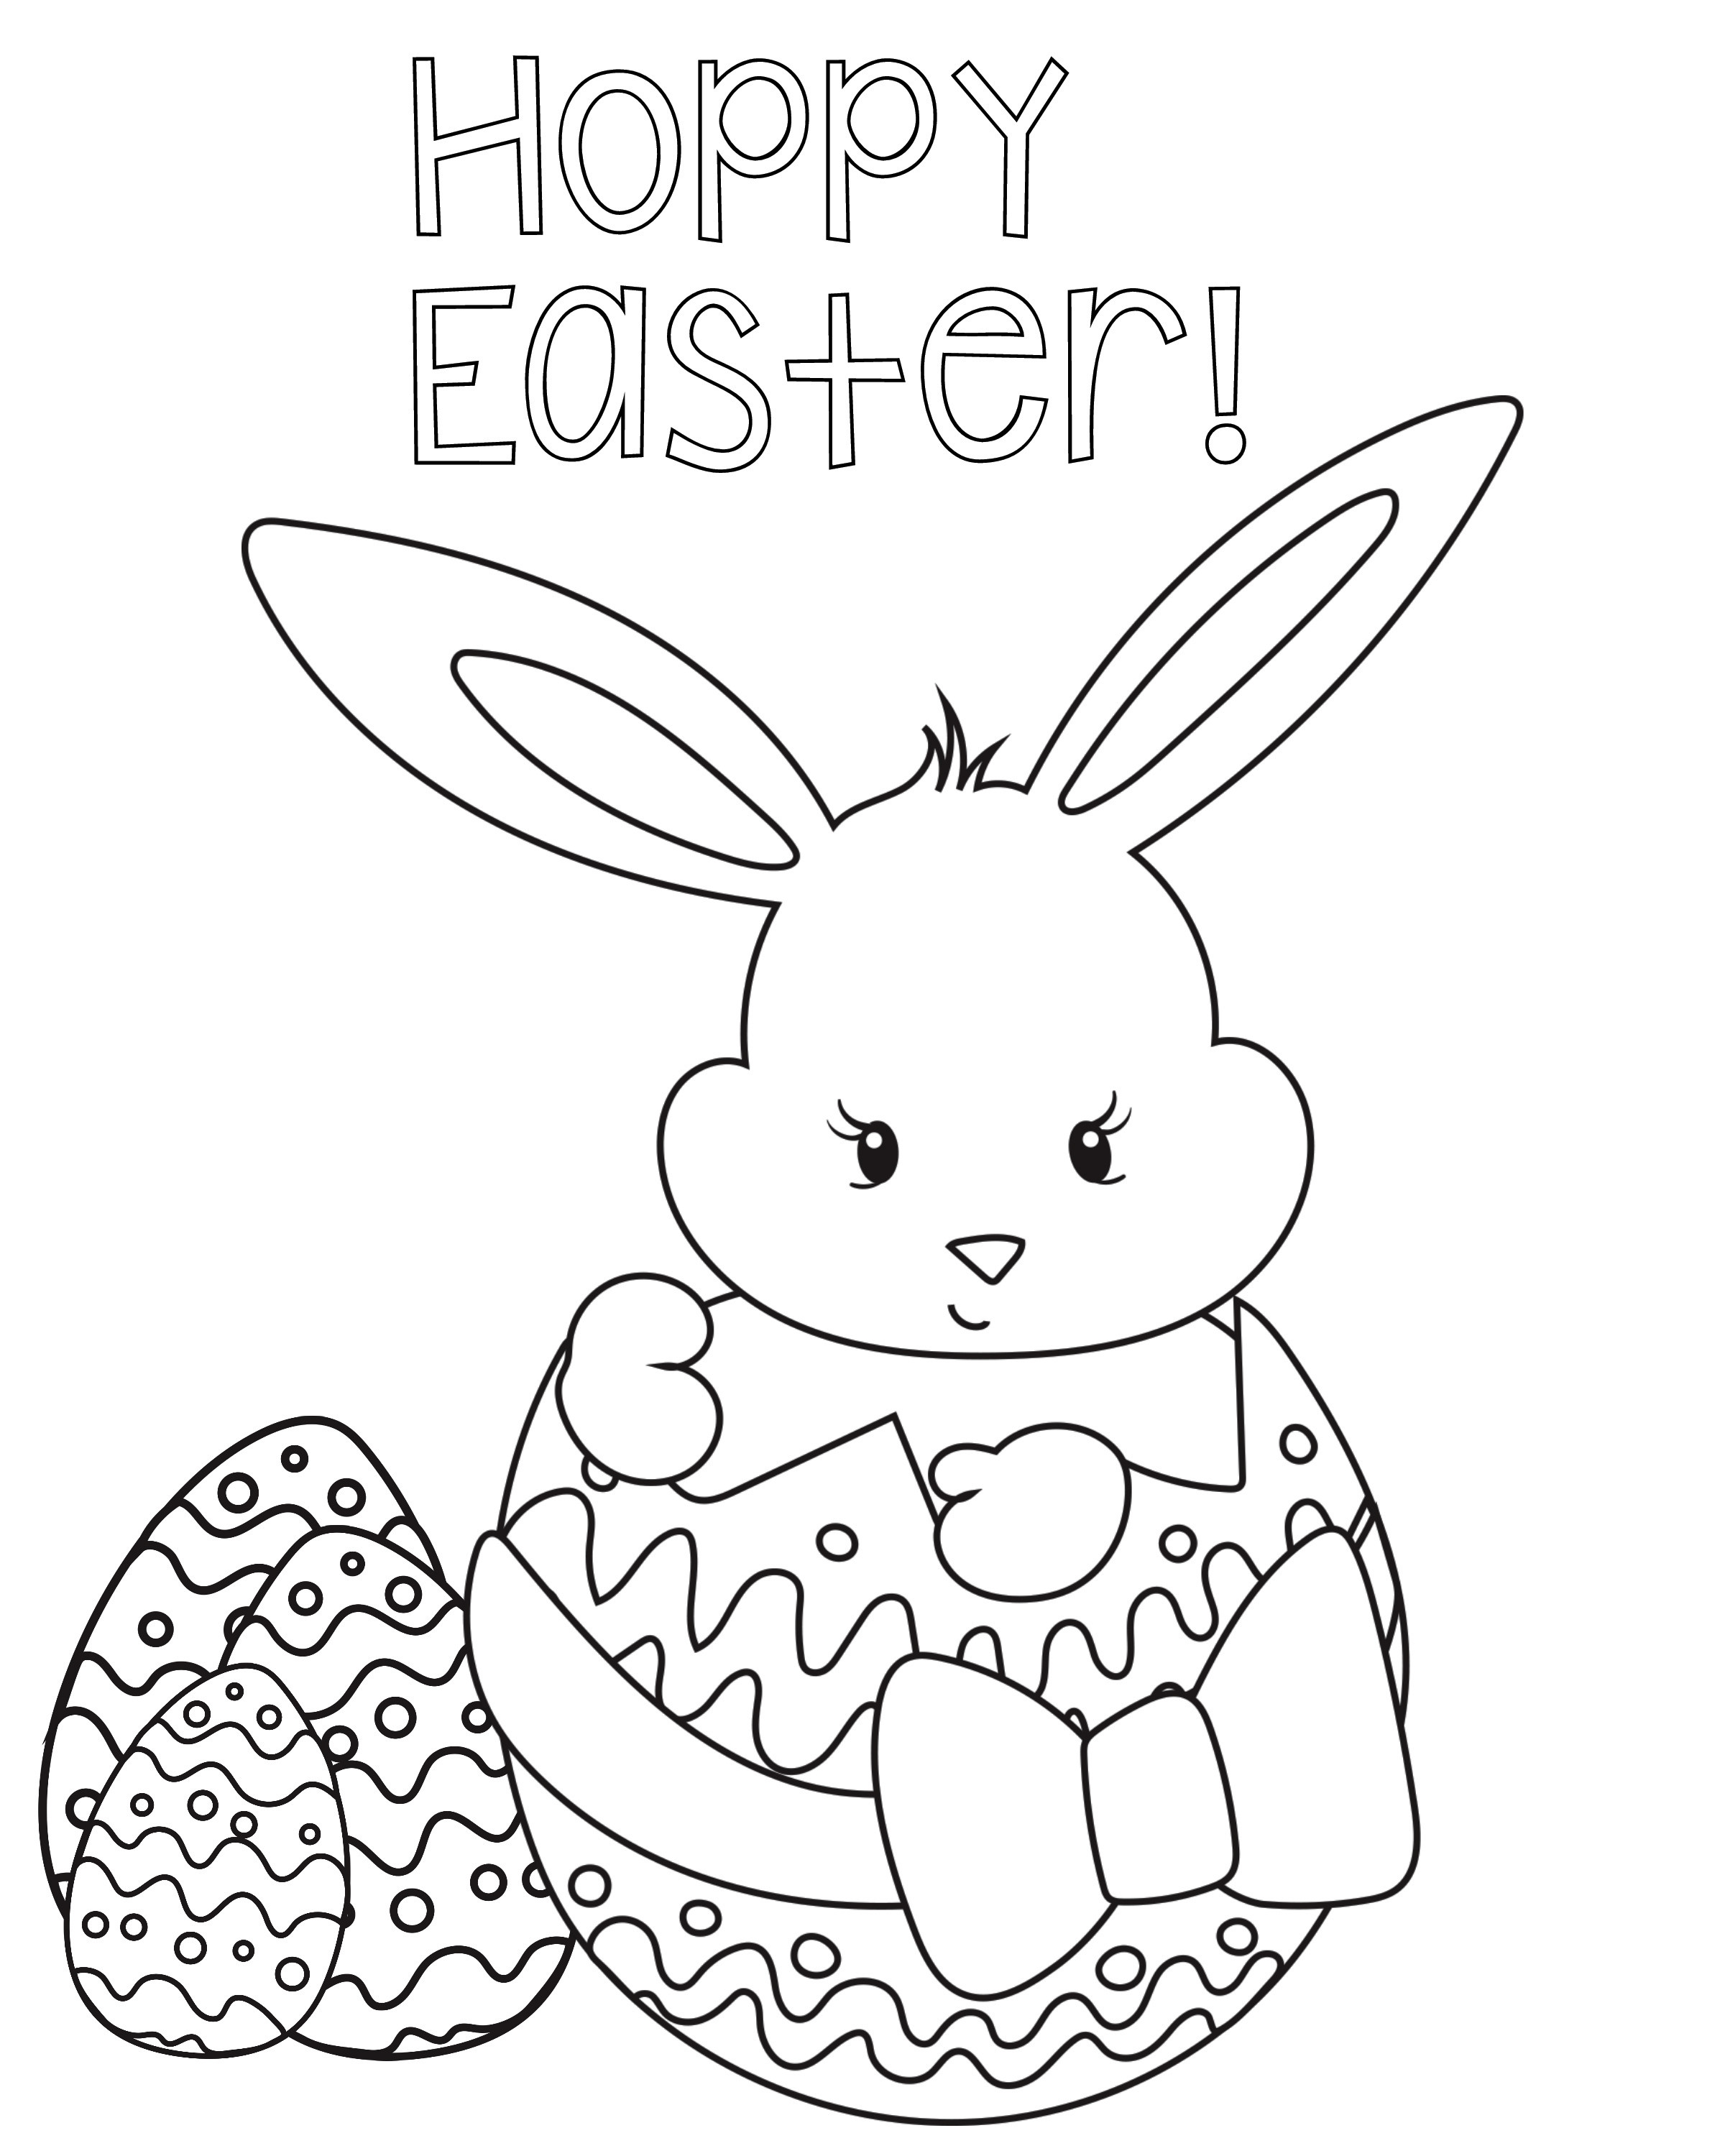 Free Printable Coloring Sheets Easter
 Easter Coloring Pages Best Coloring Pages For Kids